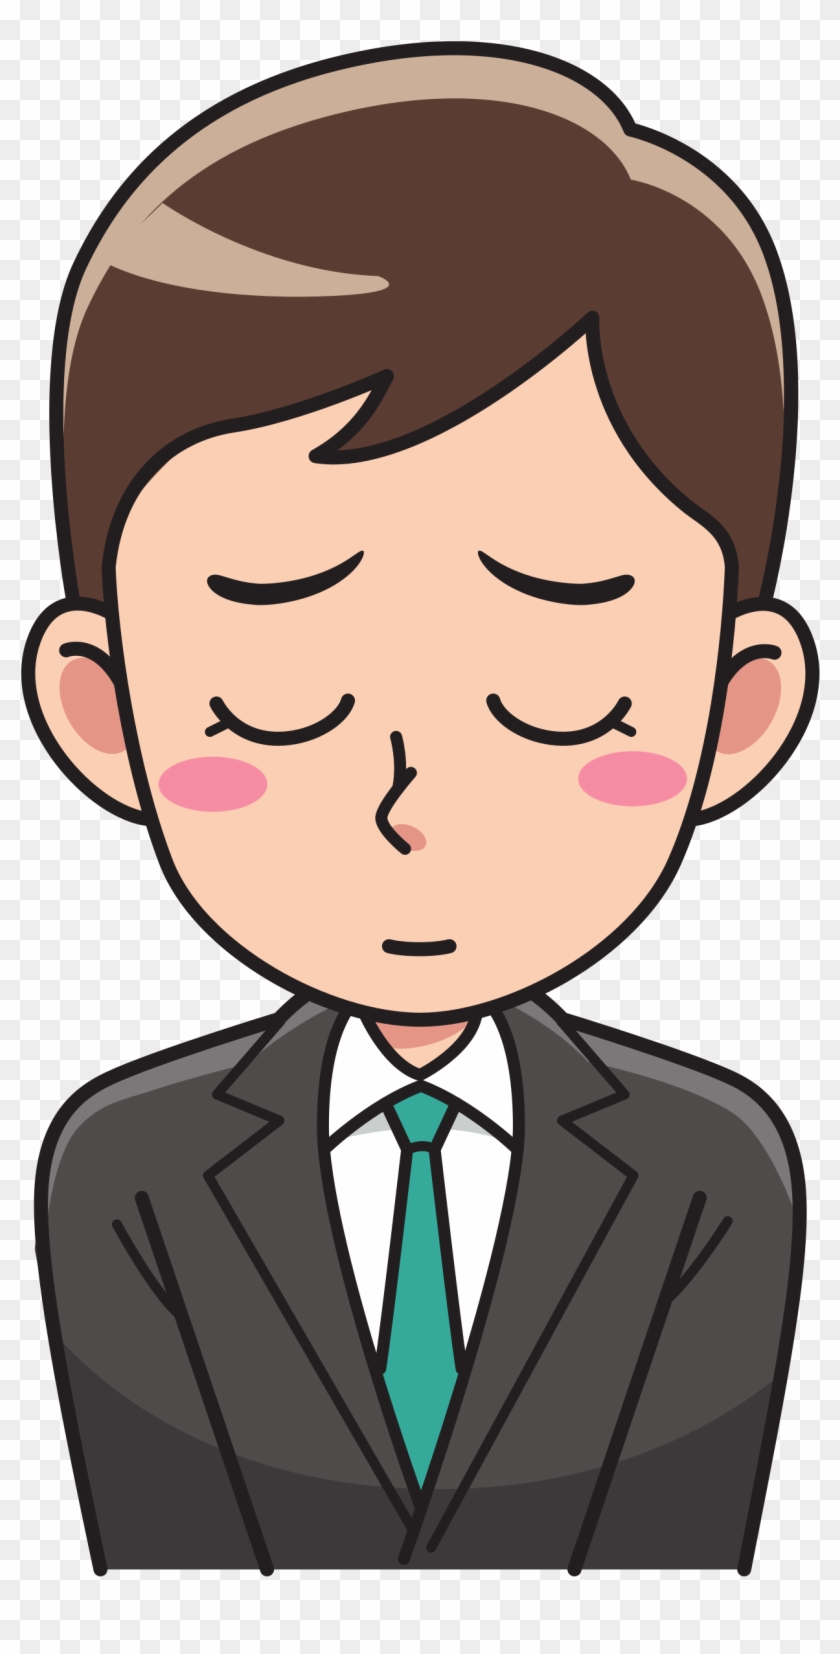 This Free Icons Png Design Of Business Man - Businessperson #211404